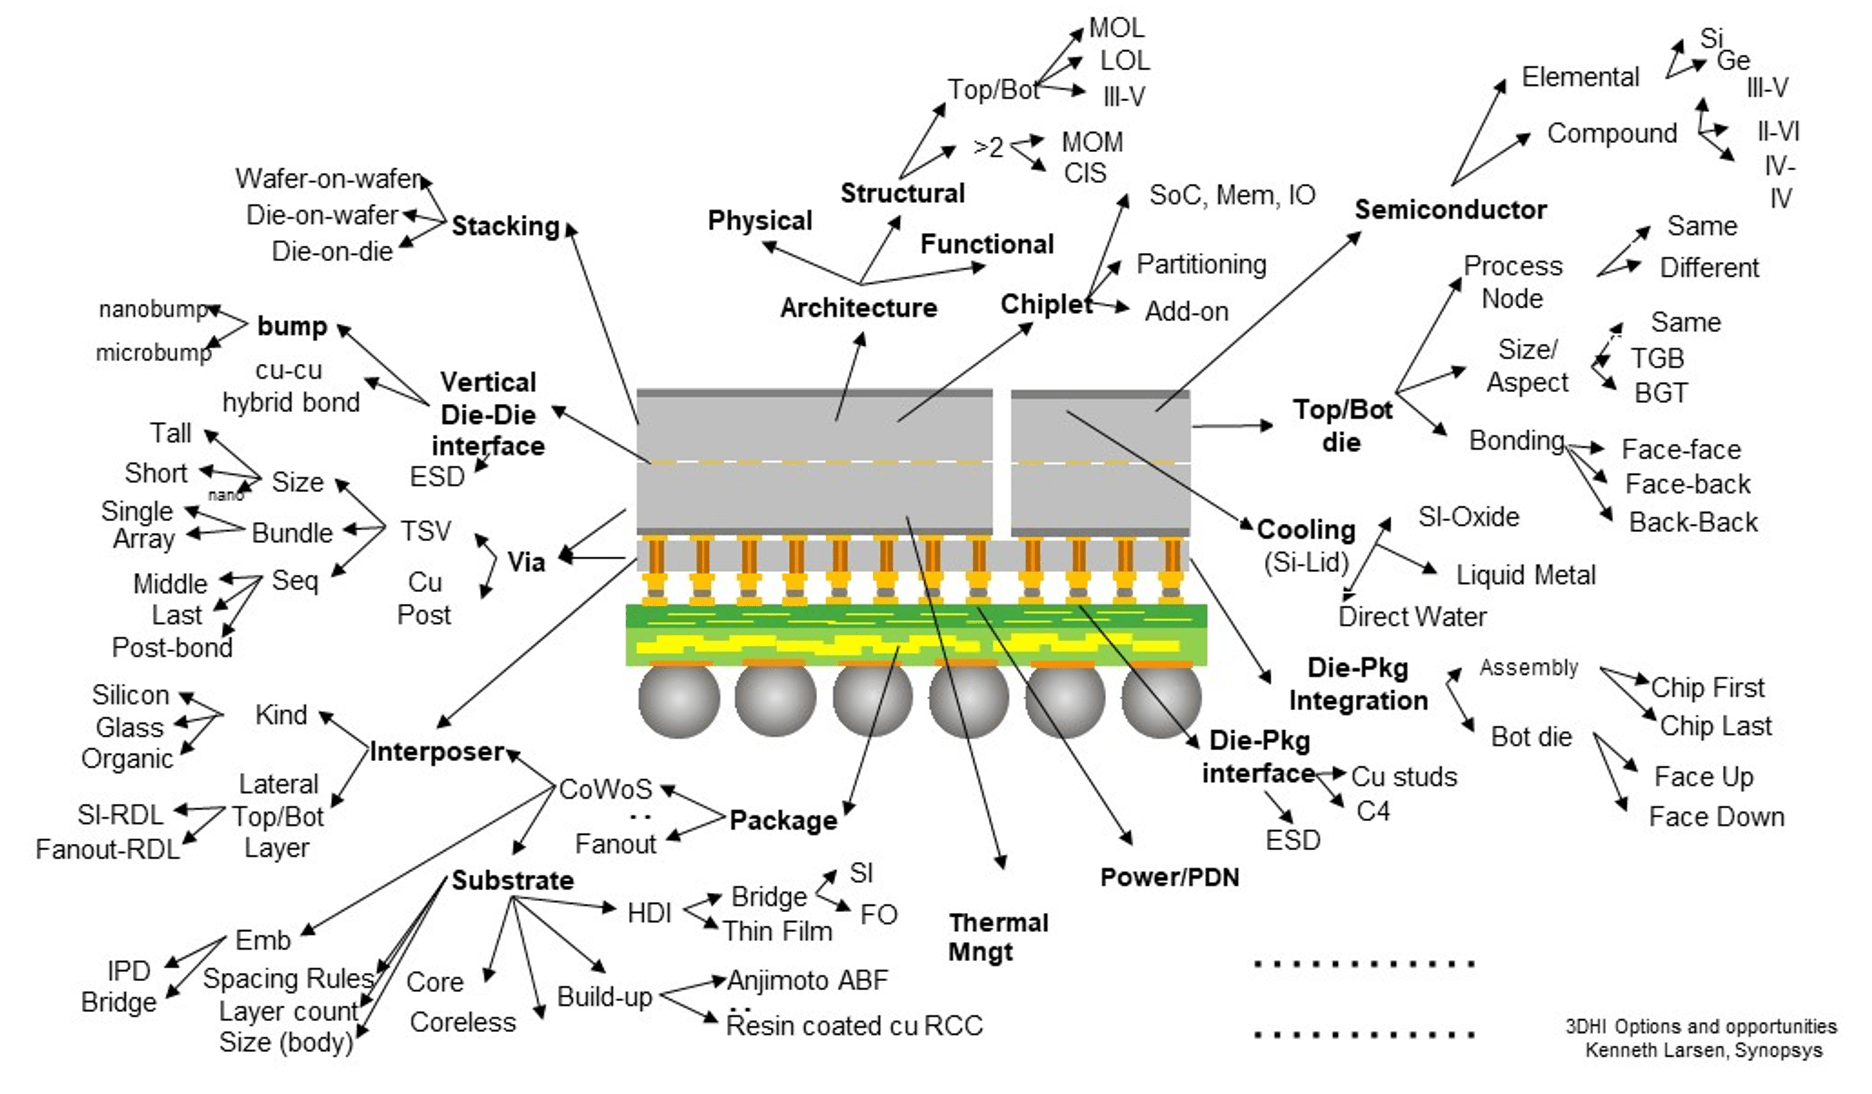 Fig. 3: There are a multitude of choices in multi-die packaging from the high-level layout to substrates, materials, bonding methods, and cooling materials. Source: Synopsys